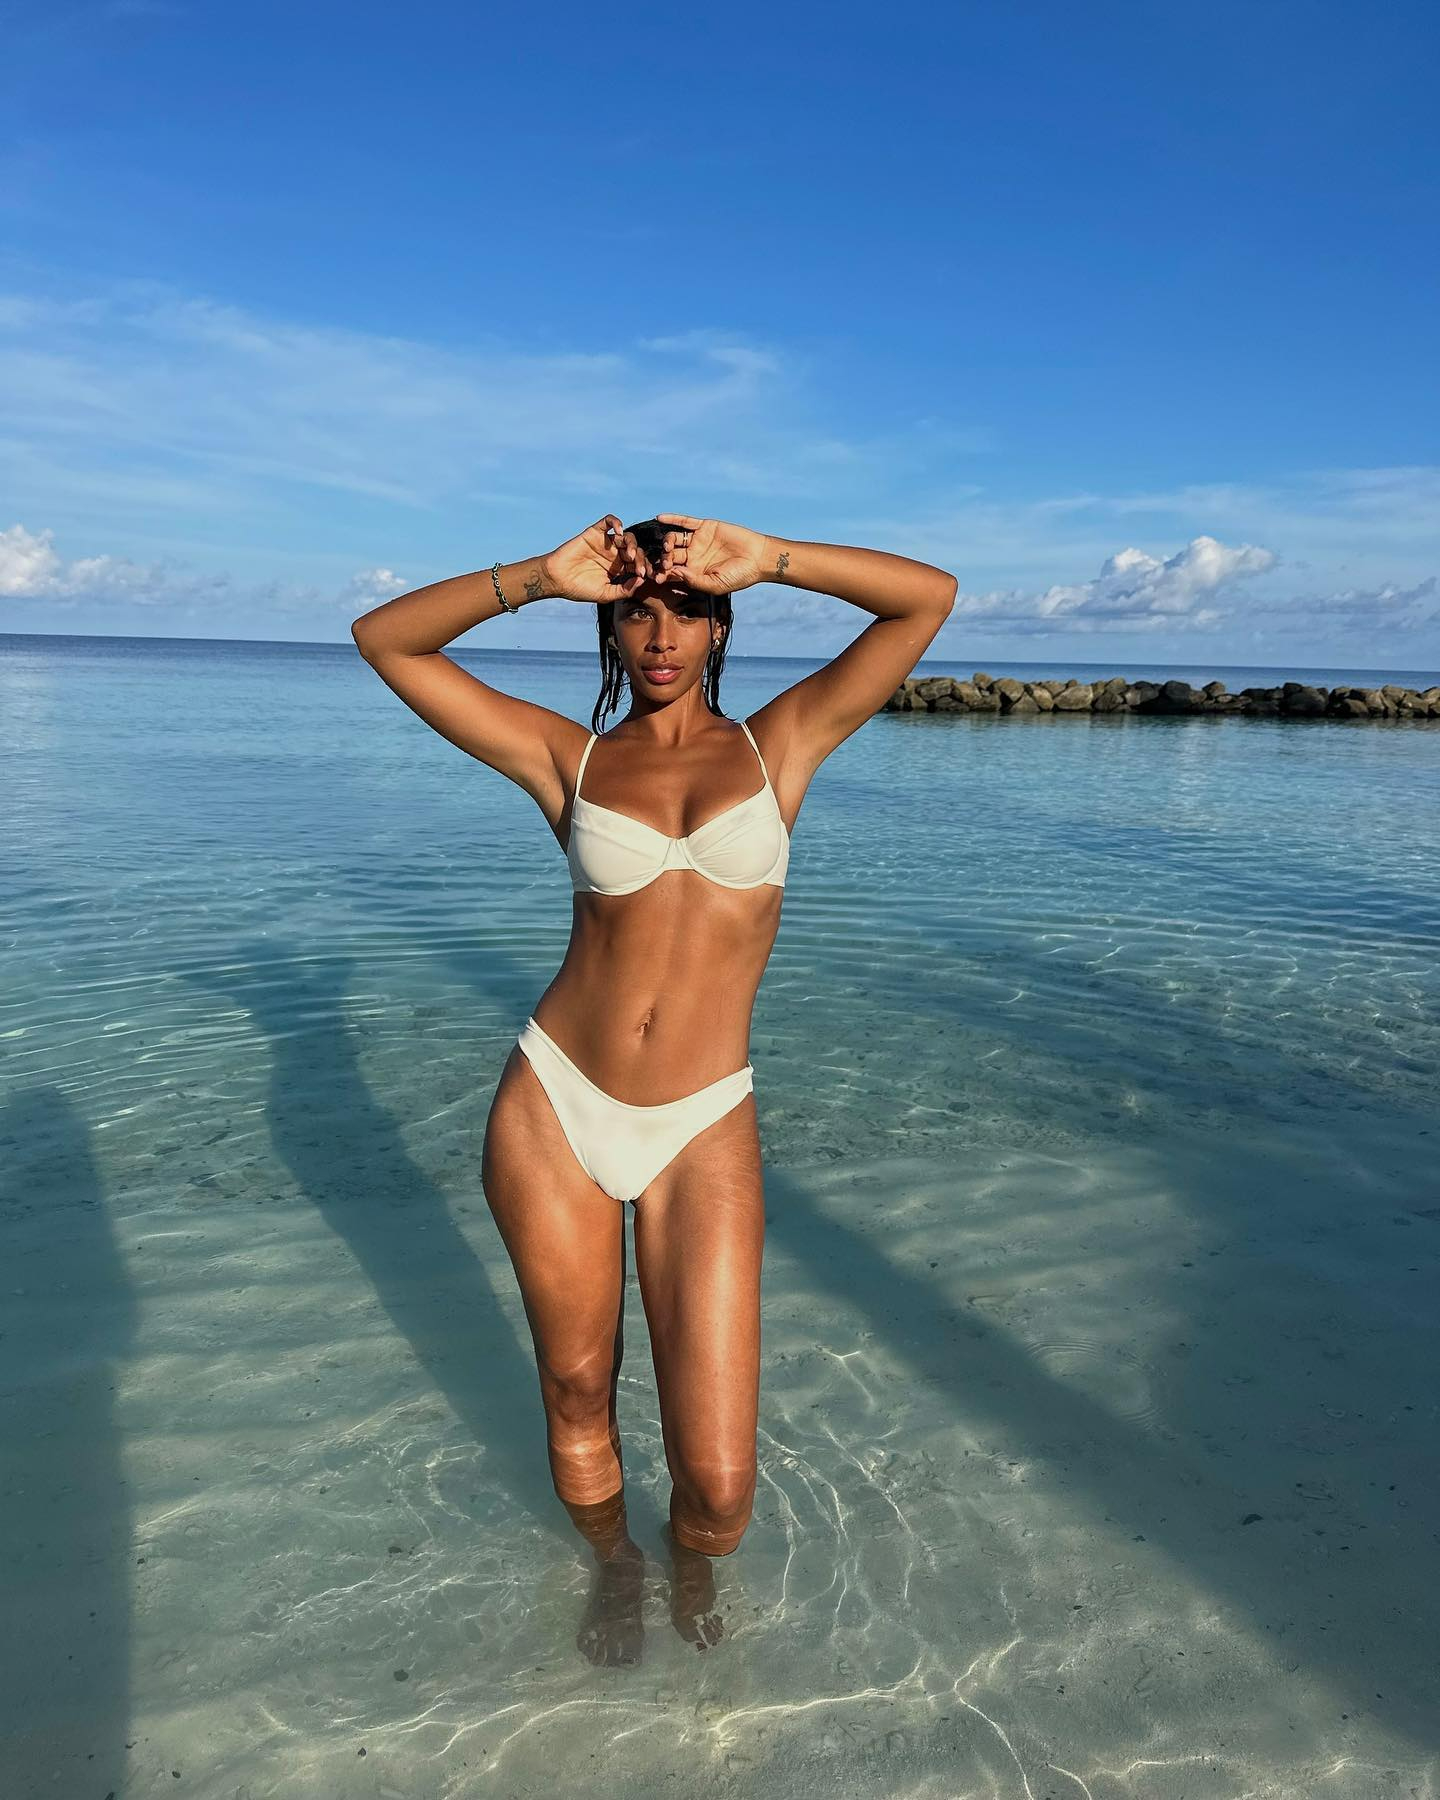 Rochelle Humes has jetted out on four holidays so far this year - including two to the Maldives